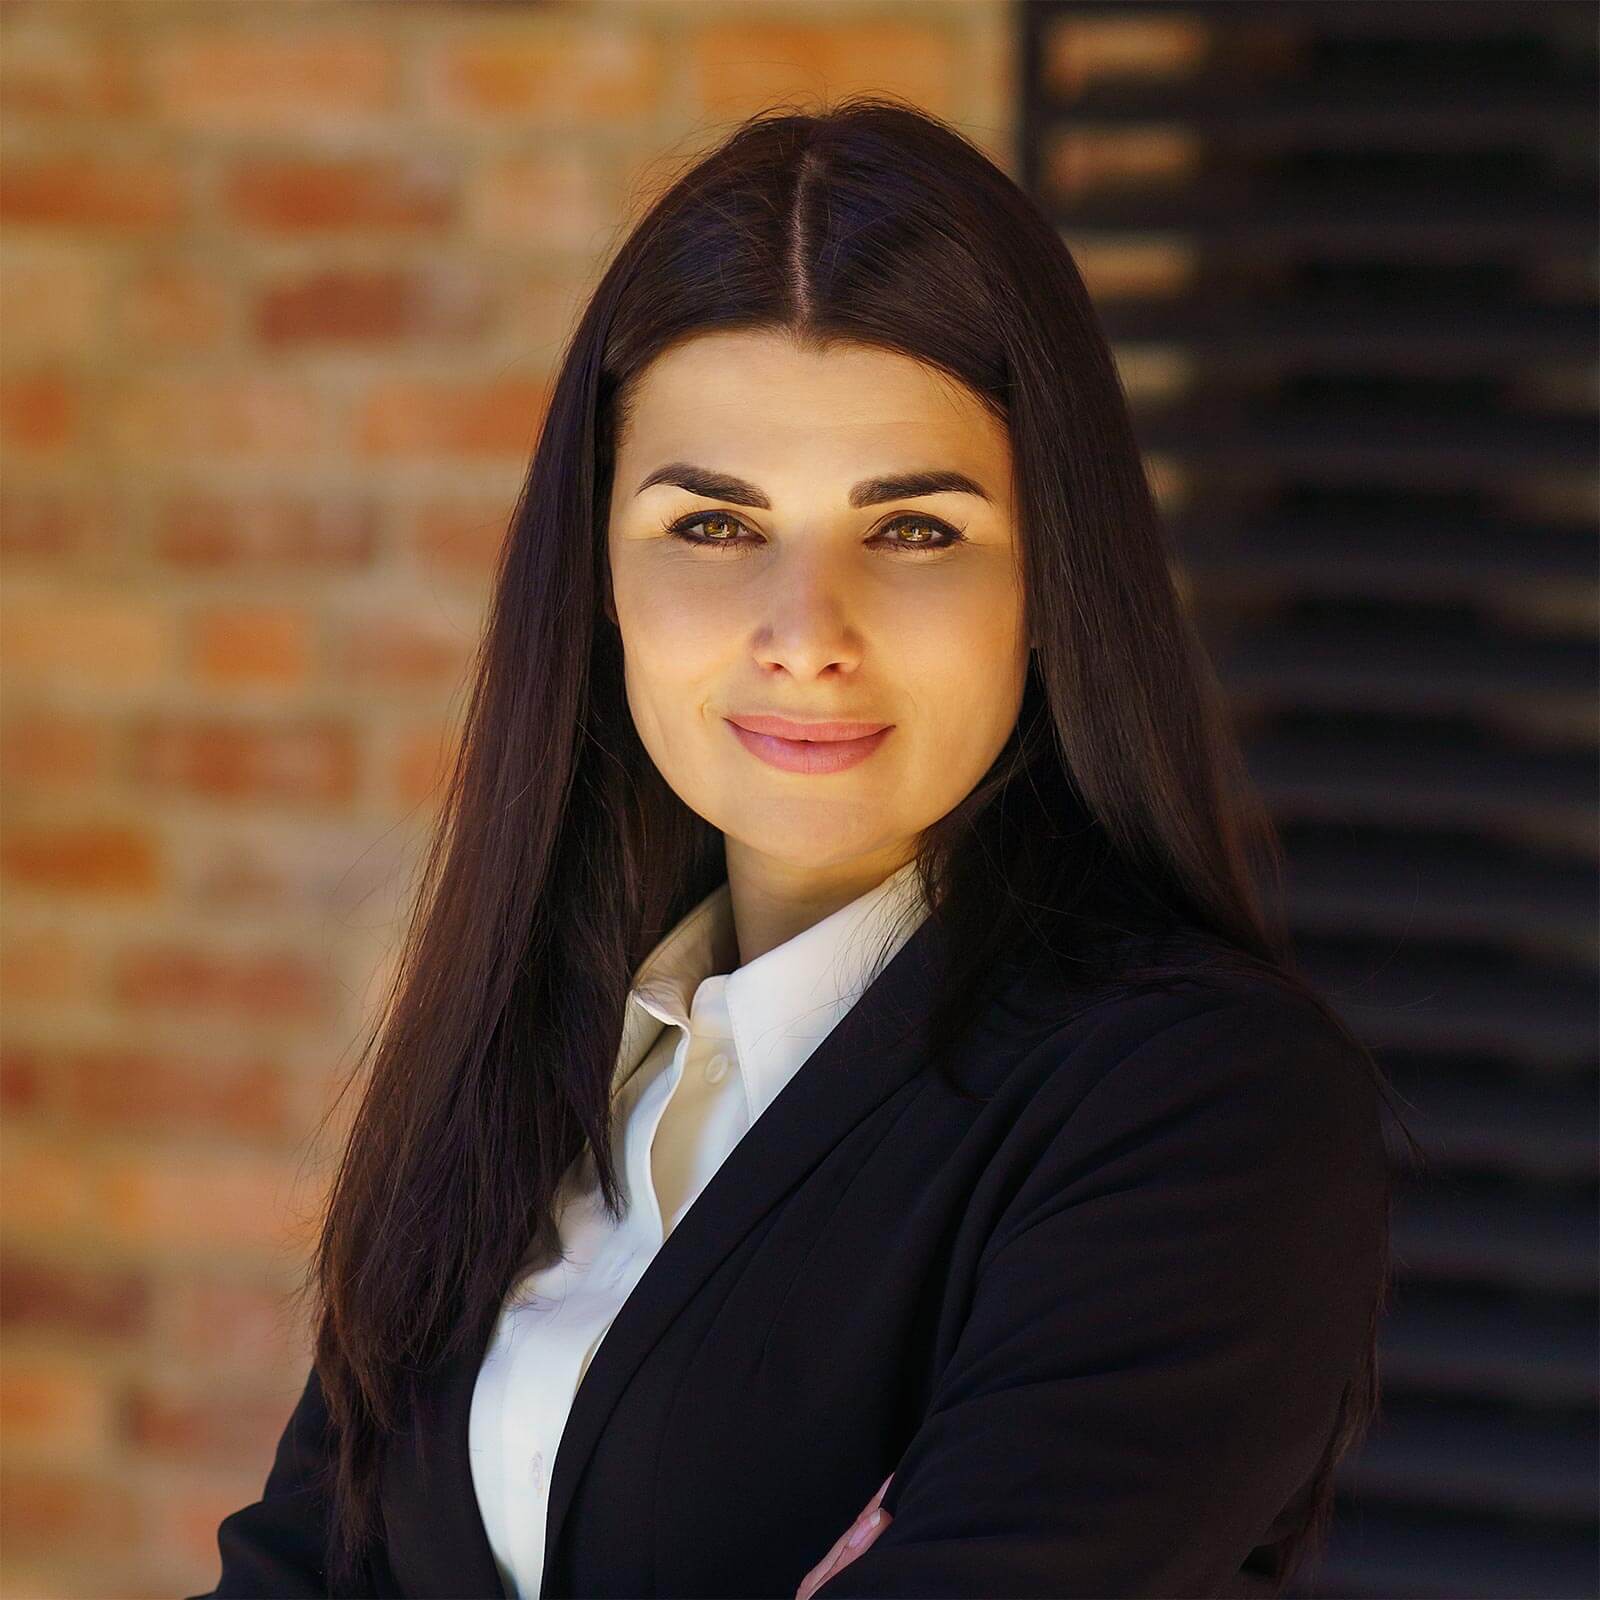 a woman in a business suit posing for a picture